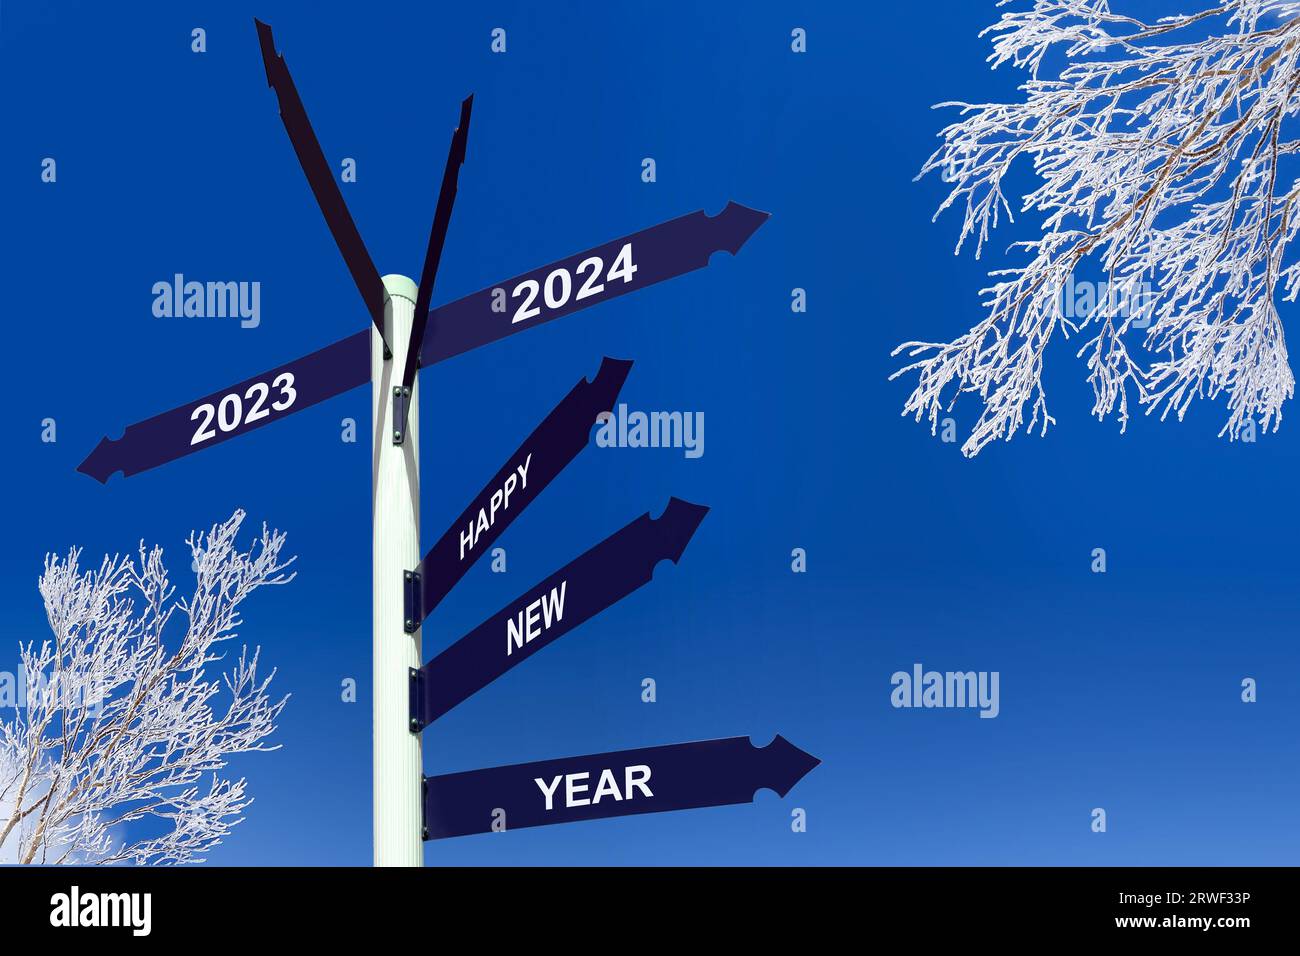 Happy new year 2024 on direction signs, snowy frosty trees and blue sky , winter greetings Stock Photo